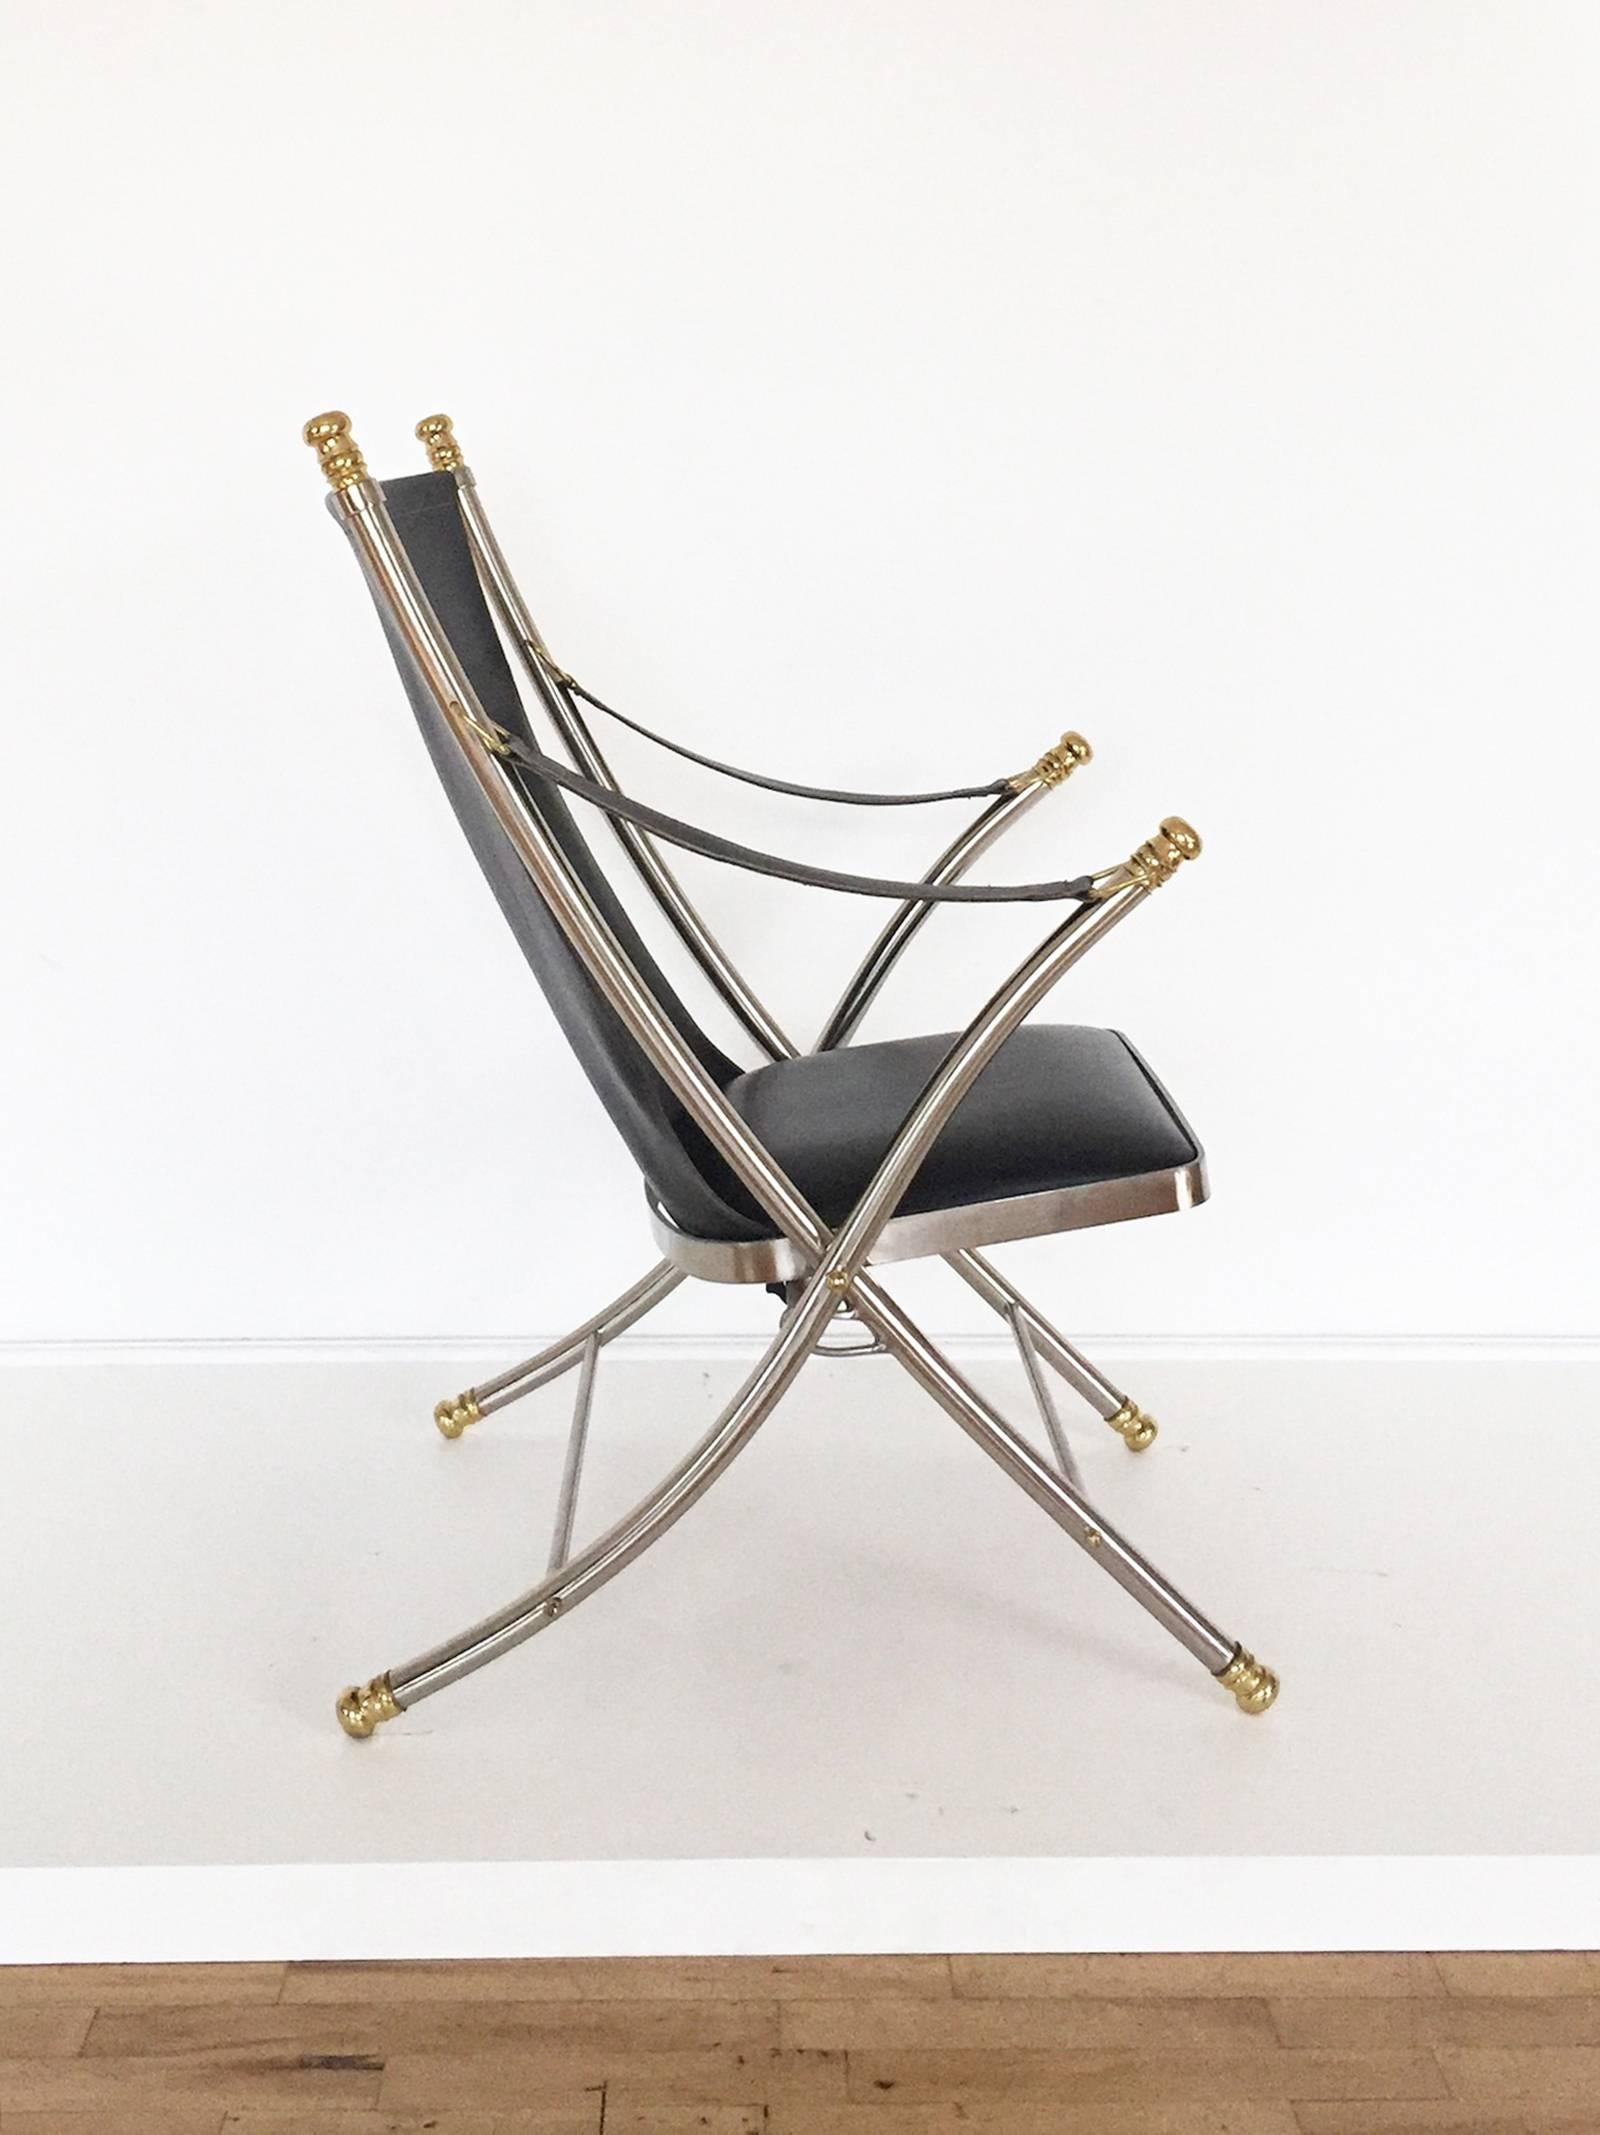 Incredible folding campaign chair from the 1970s made from tubular and flat steel, brass and leather. Seat folds via hand release under seat. Each foot impressed with 